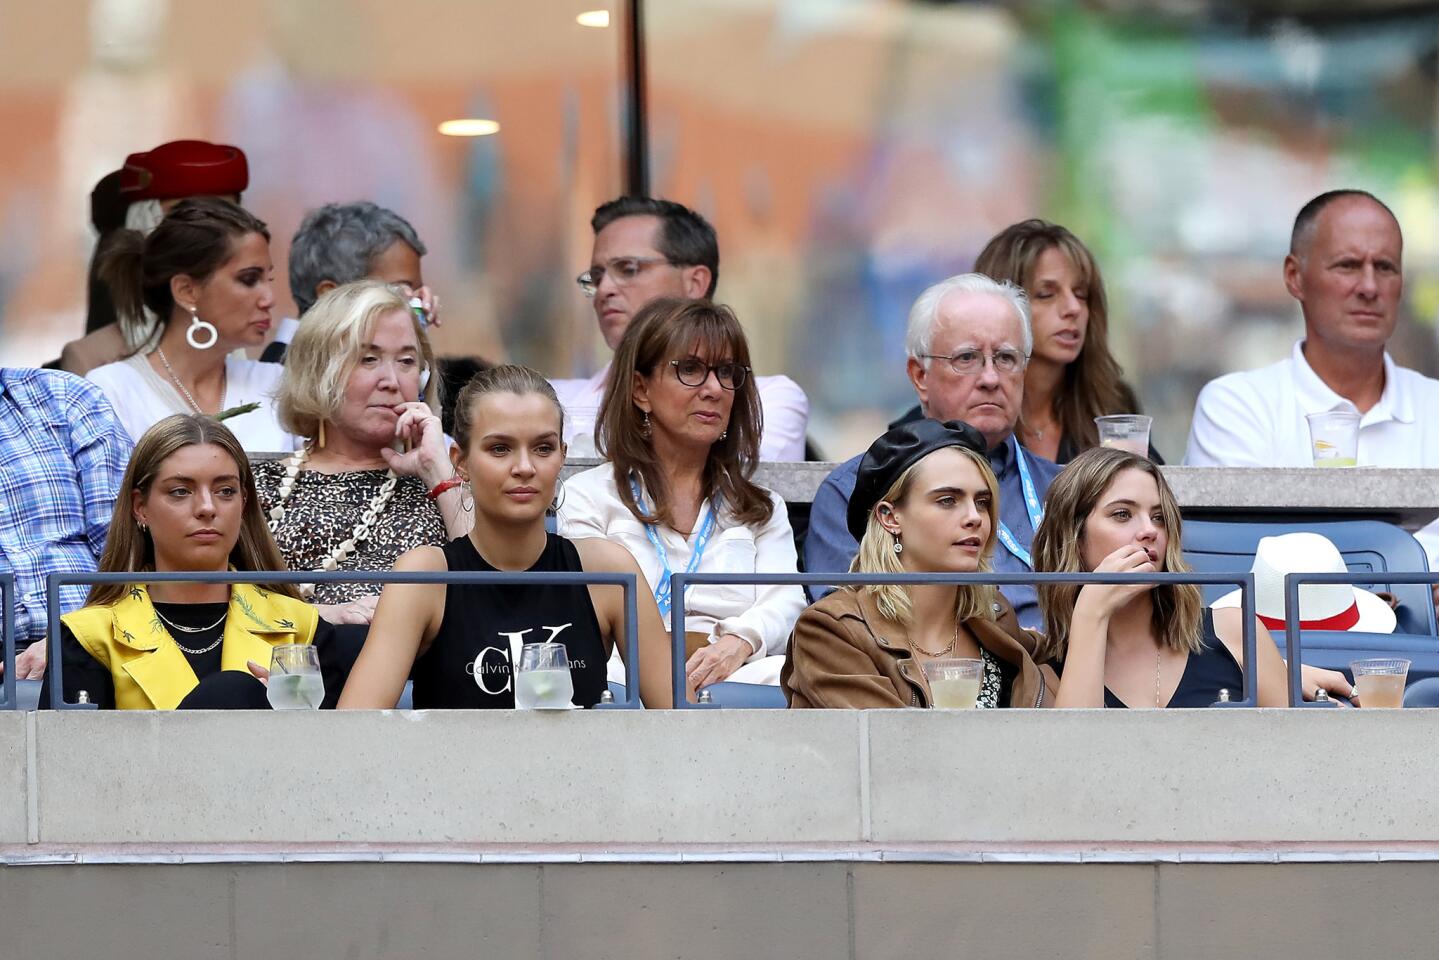 Models Josephine Skriver, Cara Delevingne and Ashley Benson attend the Women's Singles final match against between Serena Williams of the United States and Bianca Andreescu of Canada on day thirteen of the 2019 U.S. Open at the USTA Billie Jean King National Tennis Center on Sept. 7, 2019, in Queens.